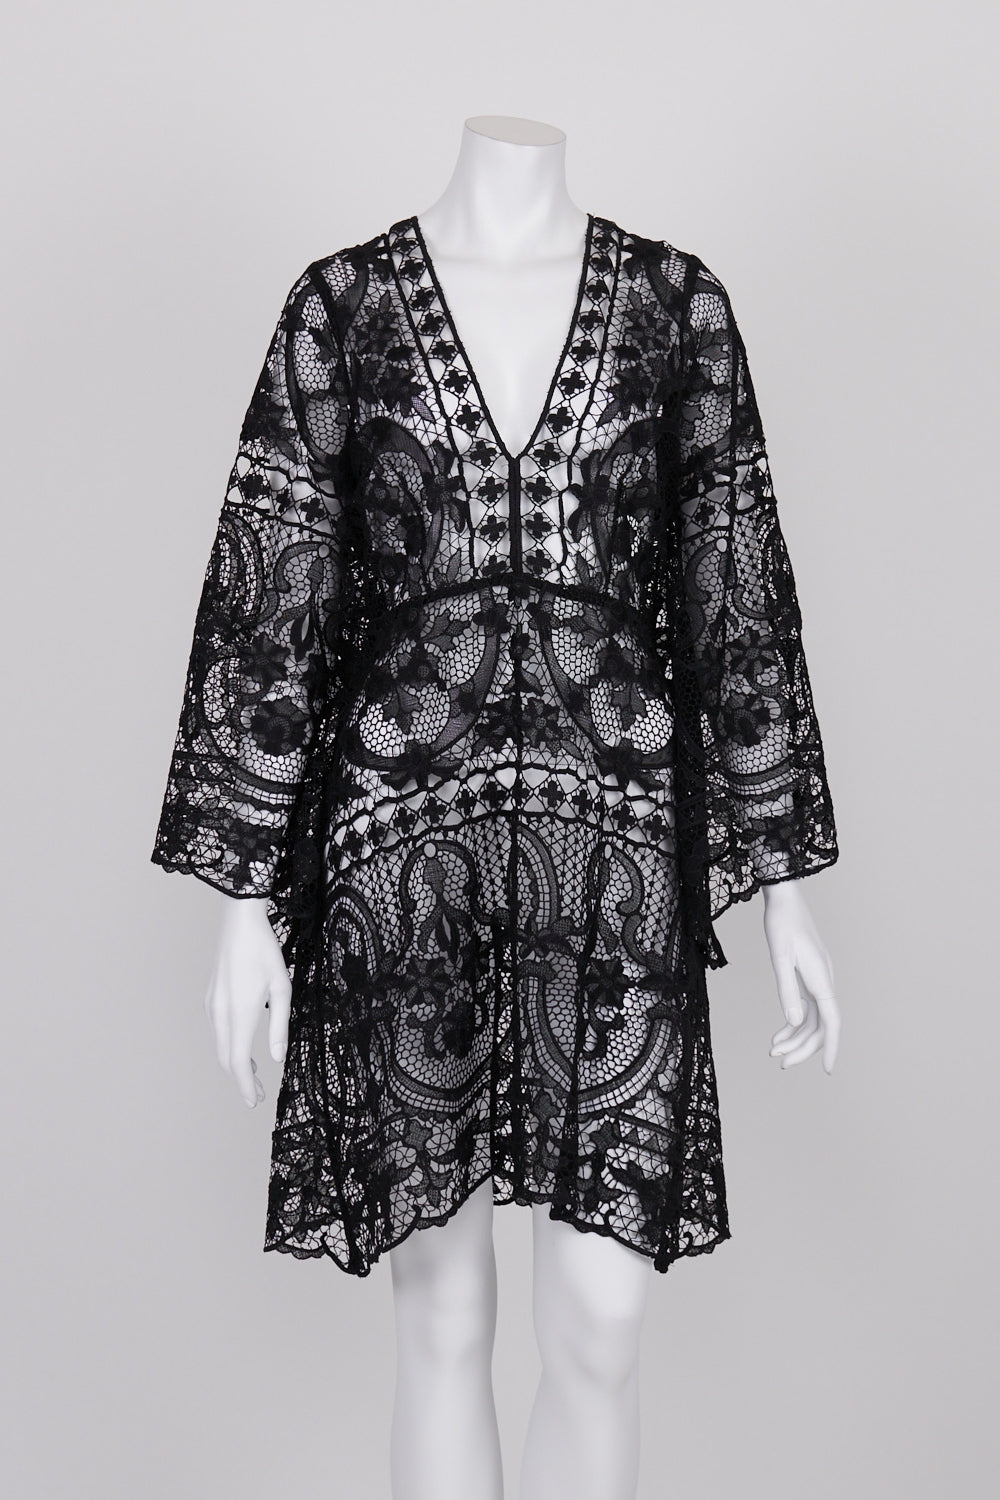 Thurley Black Lace Dress 10